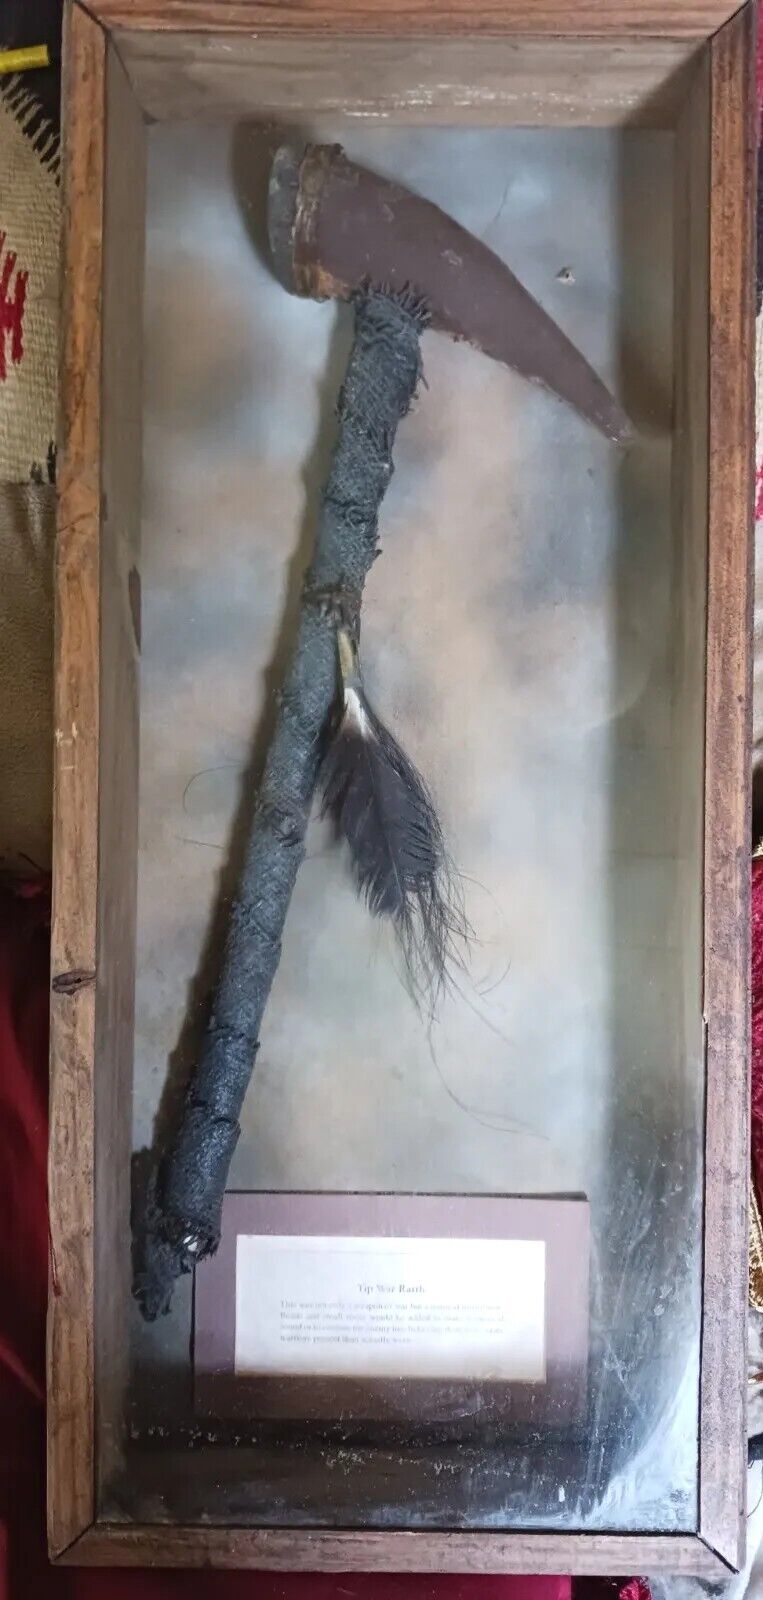 **AWESOME  OLD NATIVE AMERICAN HAND MADE  SHAMAN  RATTLE MUSEUM PIECE FRAMED**